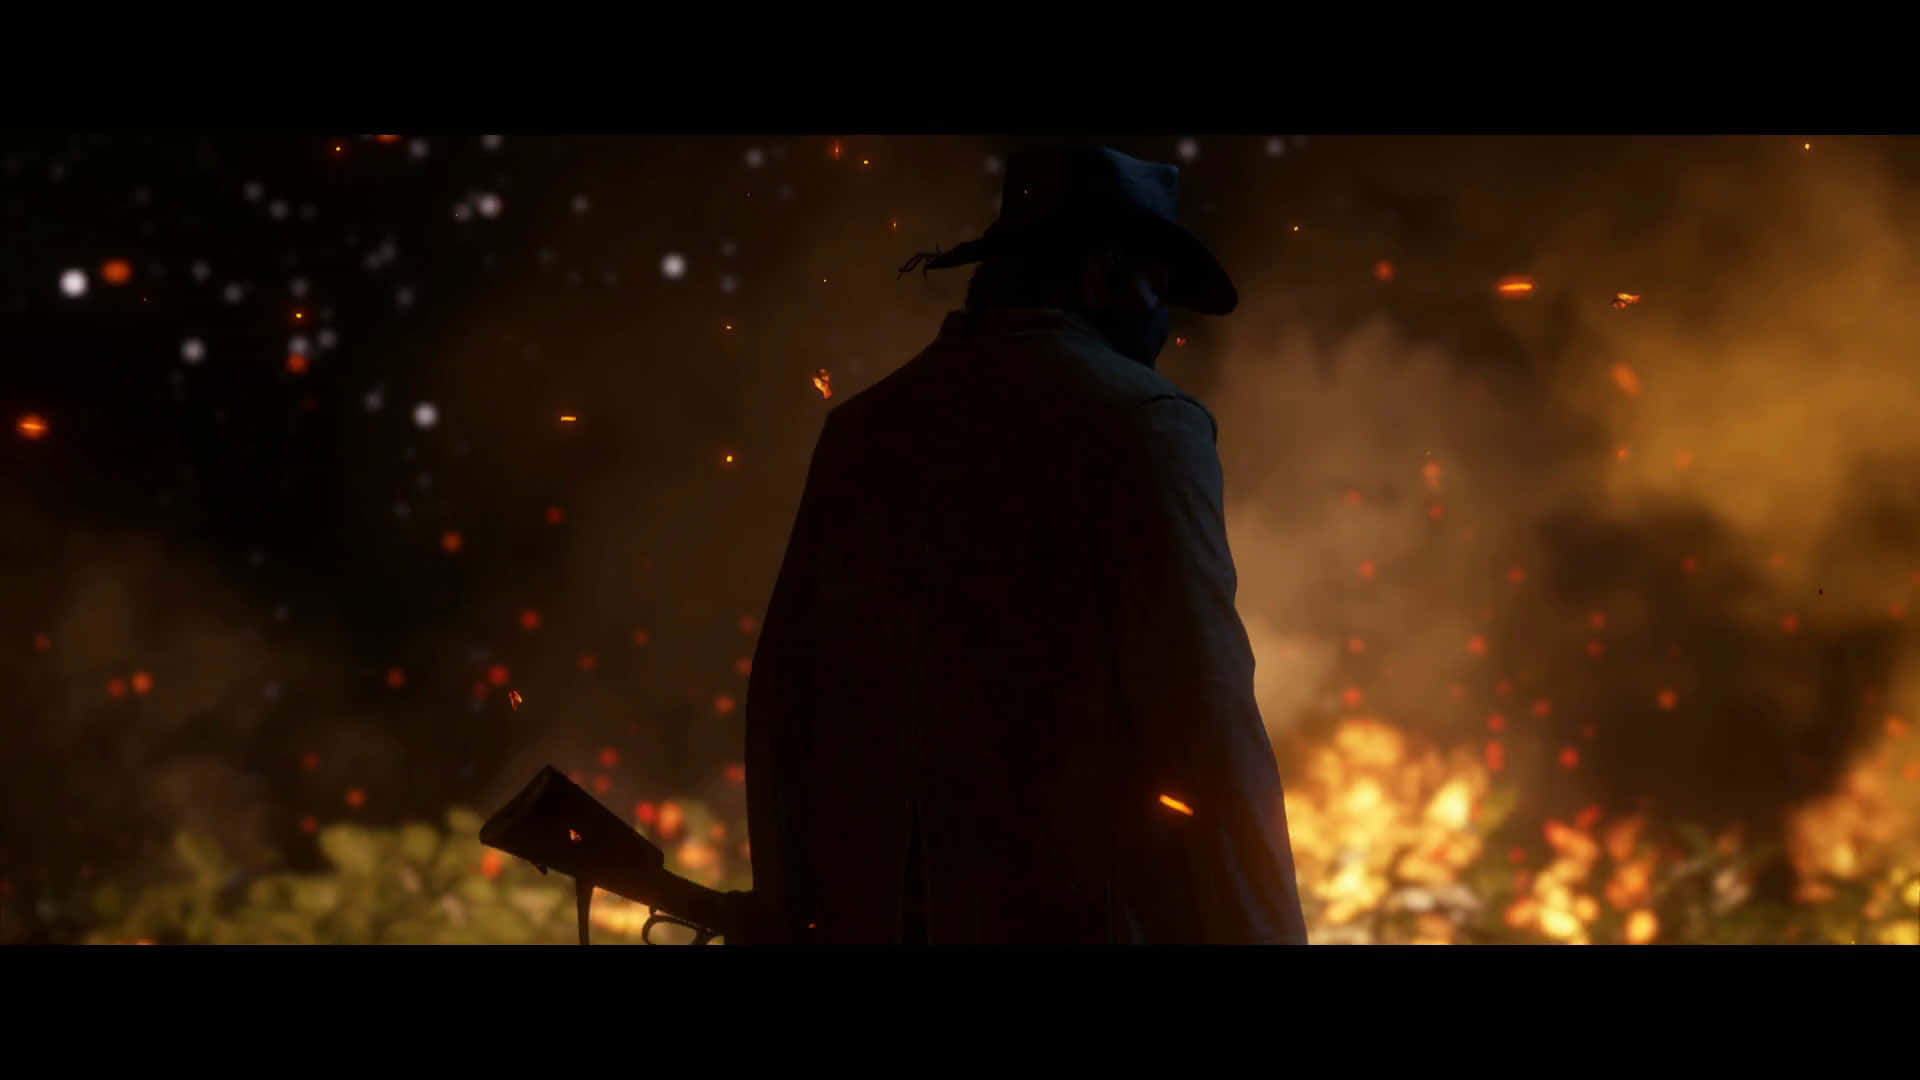 Explore the Wild West in Red Dead Redemption 2